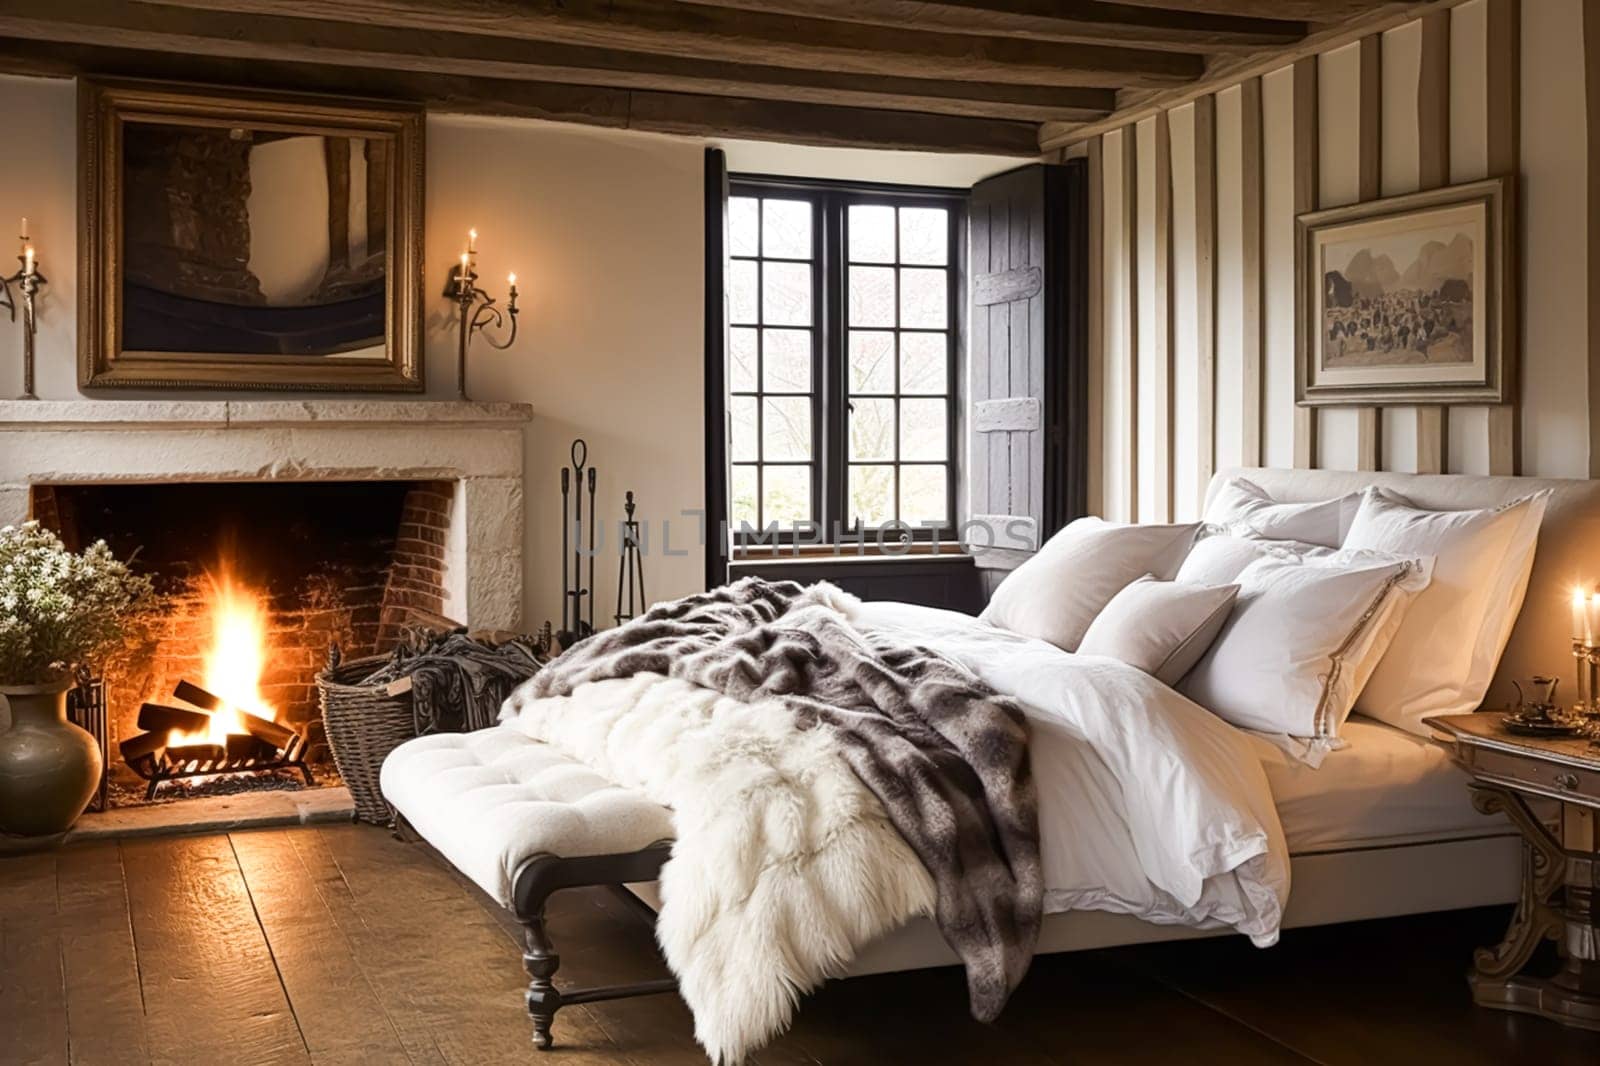 Bedroom decor, interior design and holiday rental, classic bed with elegant plush bedding and furniture, English country house and cottage style idea